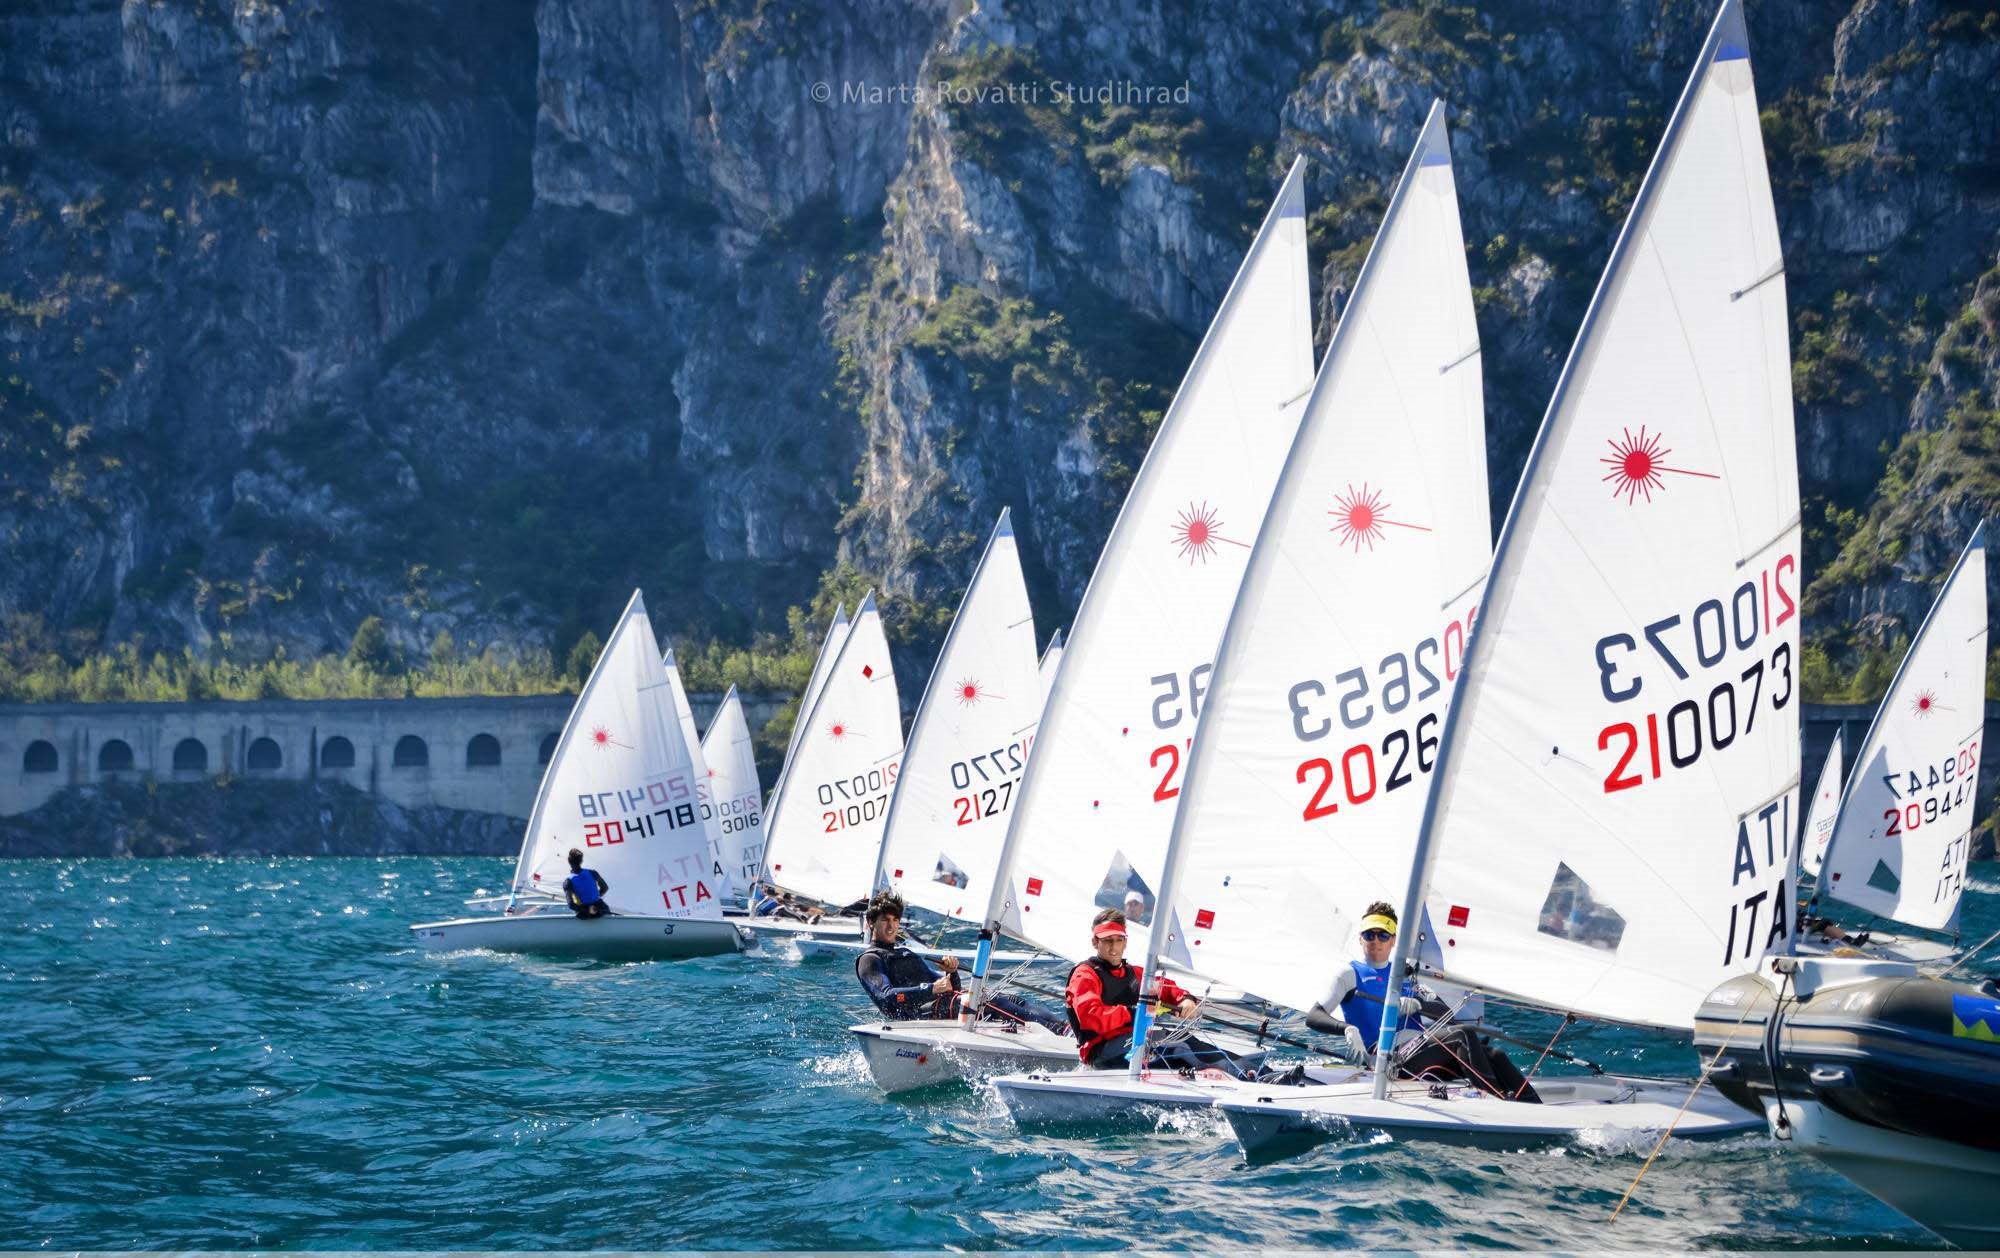  Laser  Europacup 2019  Act 4  Torbole ITA  Start today with 330 boats from 5 continents